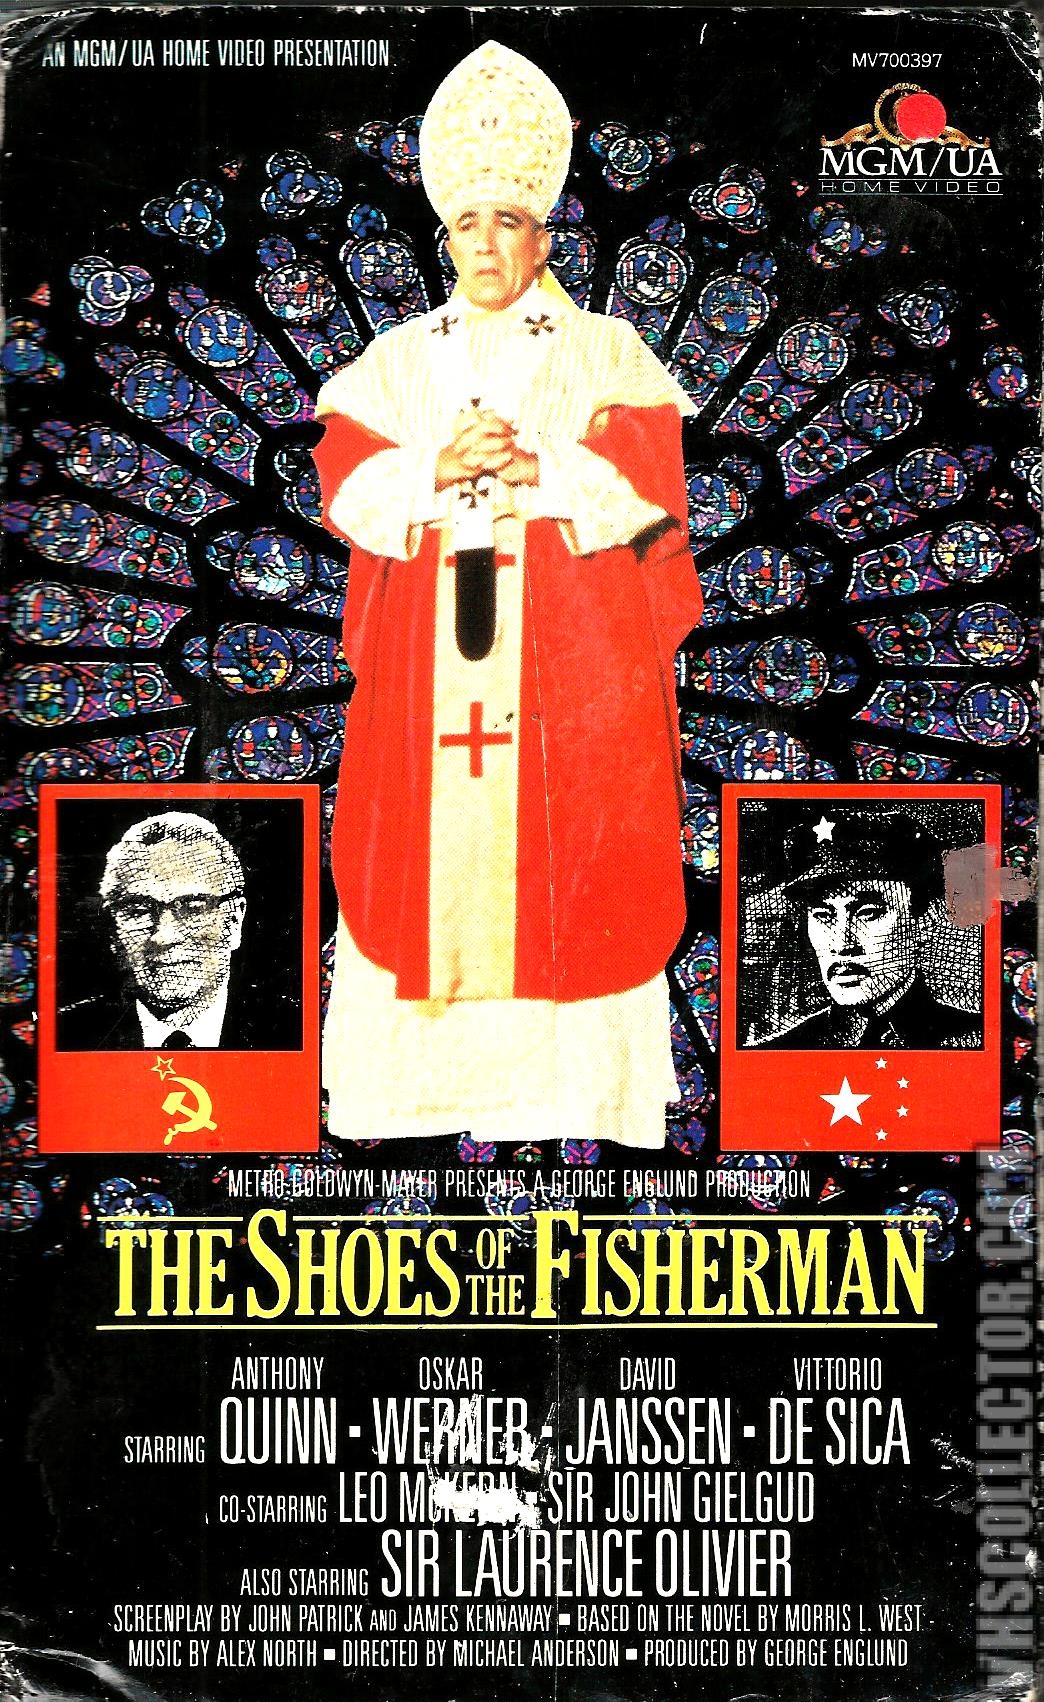 Shoes of the Fisherman | VHSCollector.com